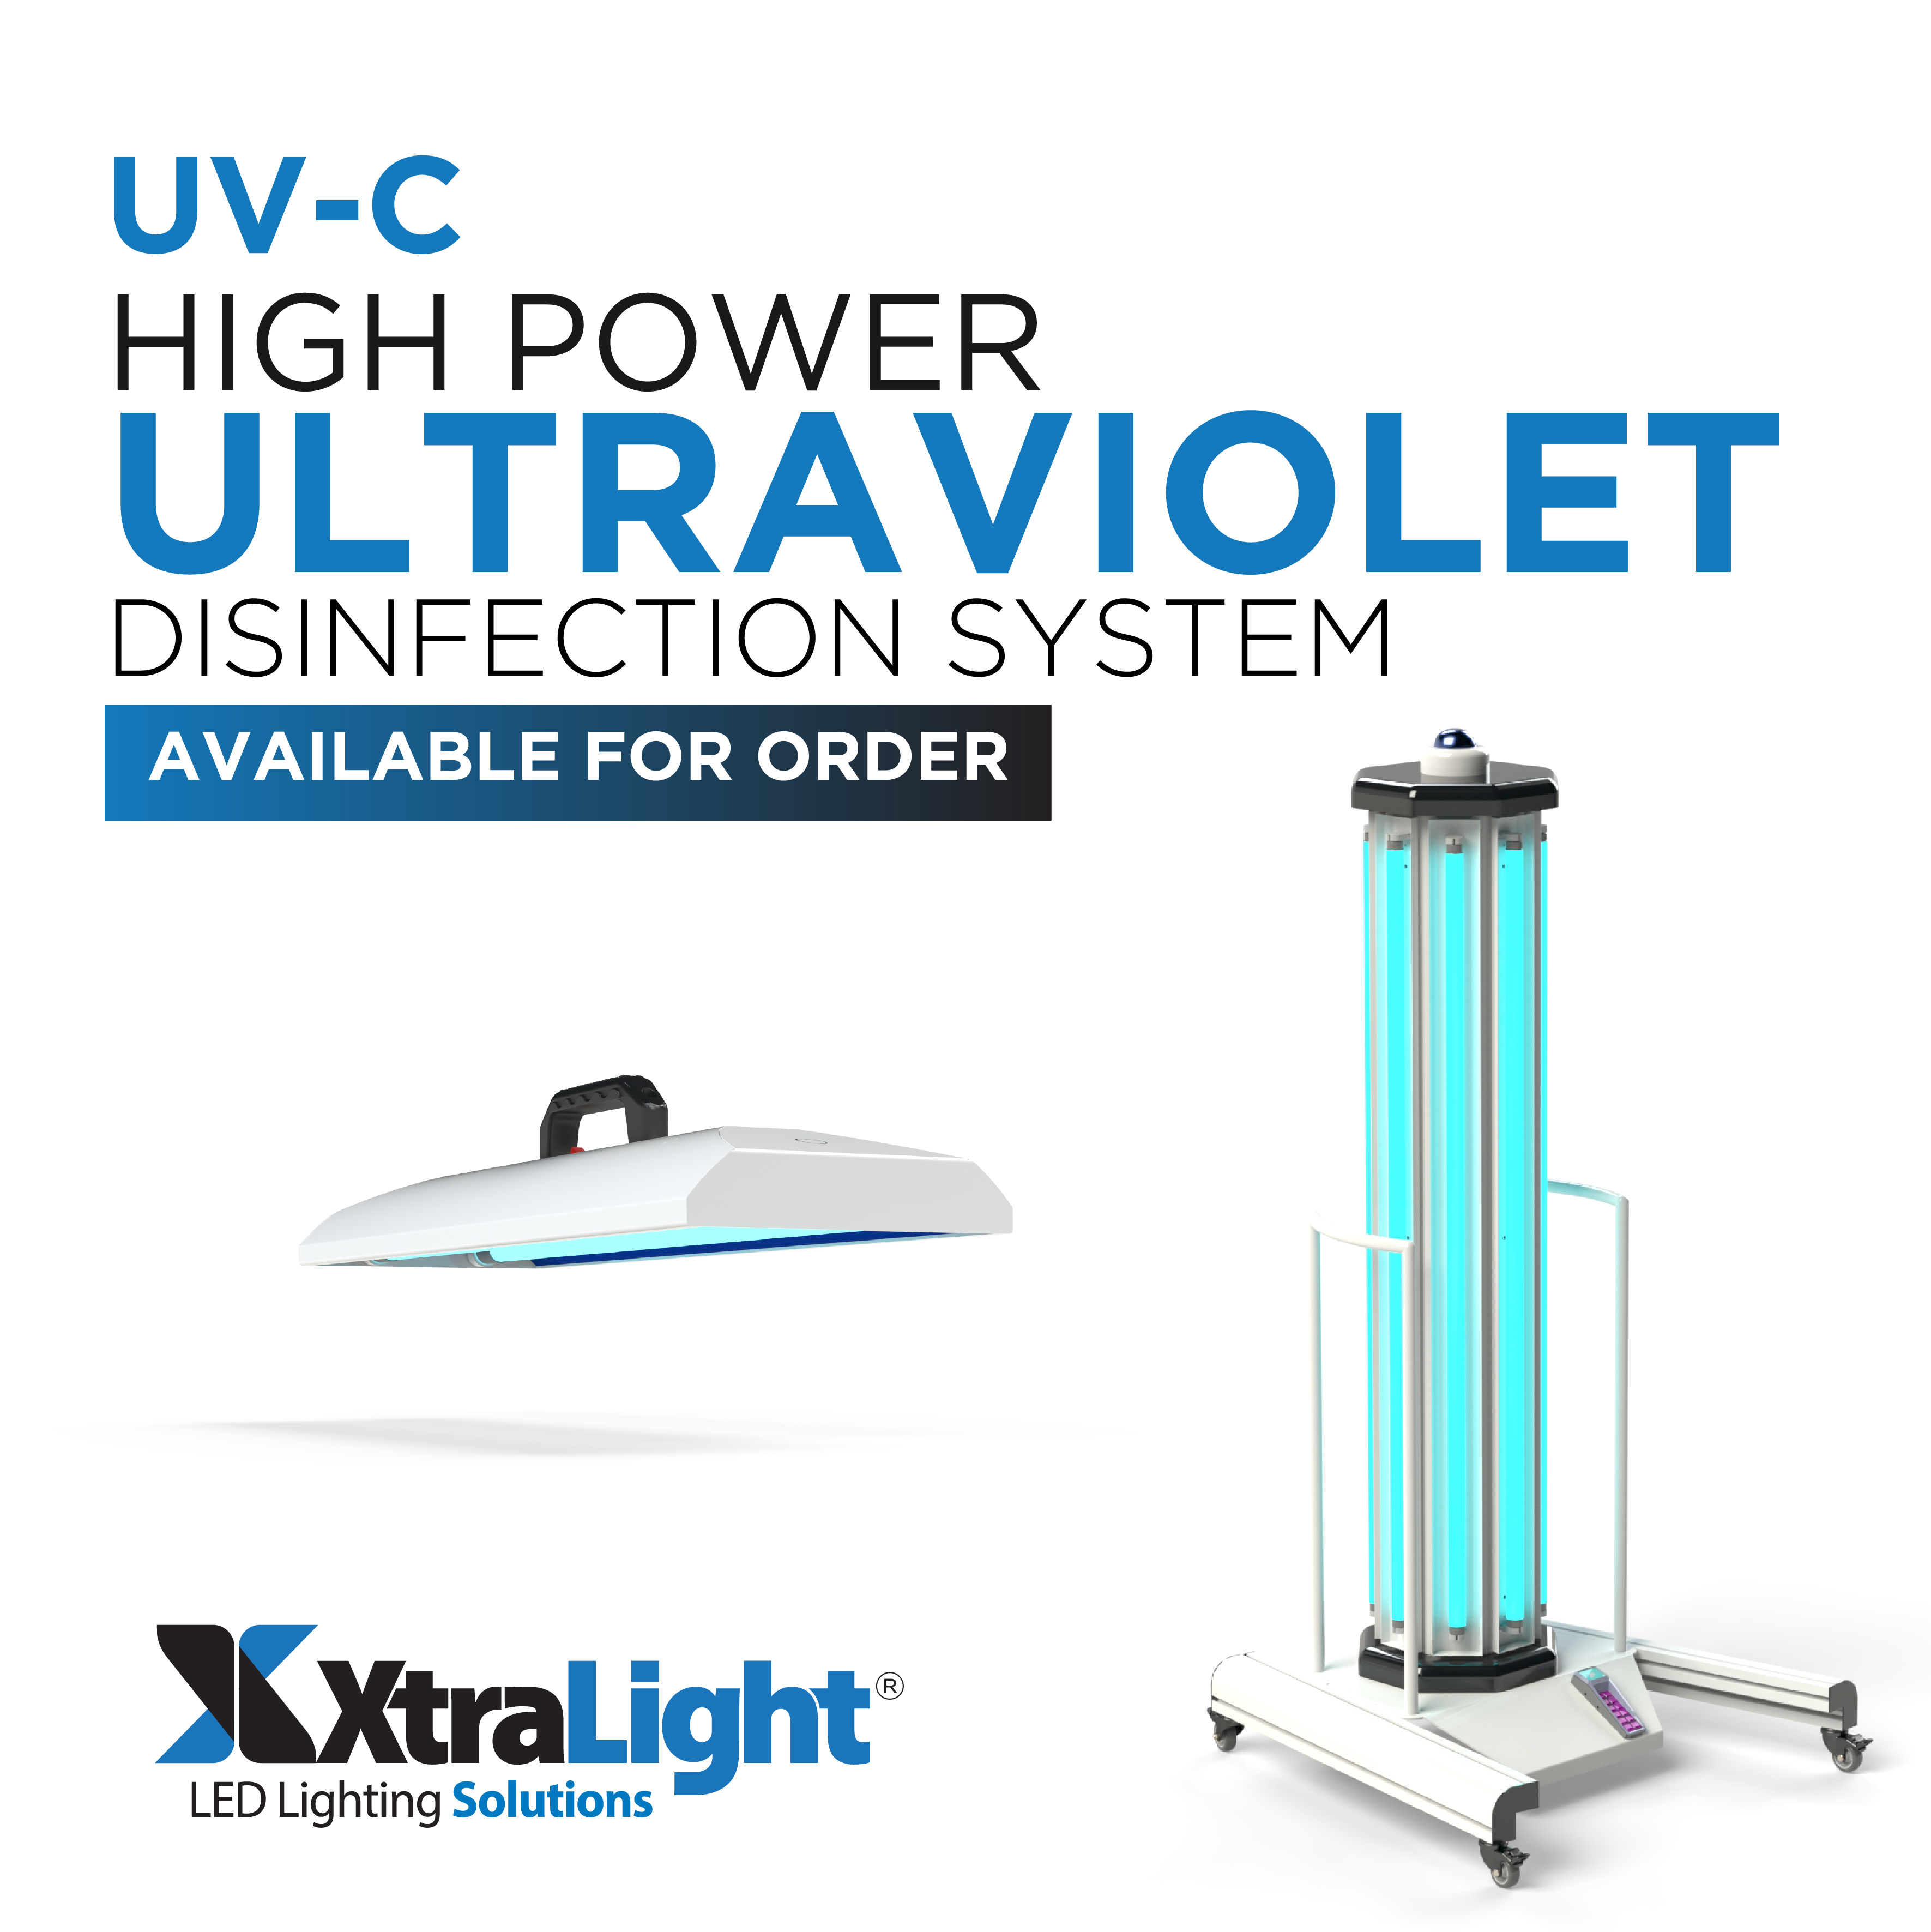 Viruses and Bacteria Are No Match for High Power UVC Disinfection